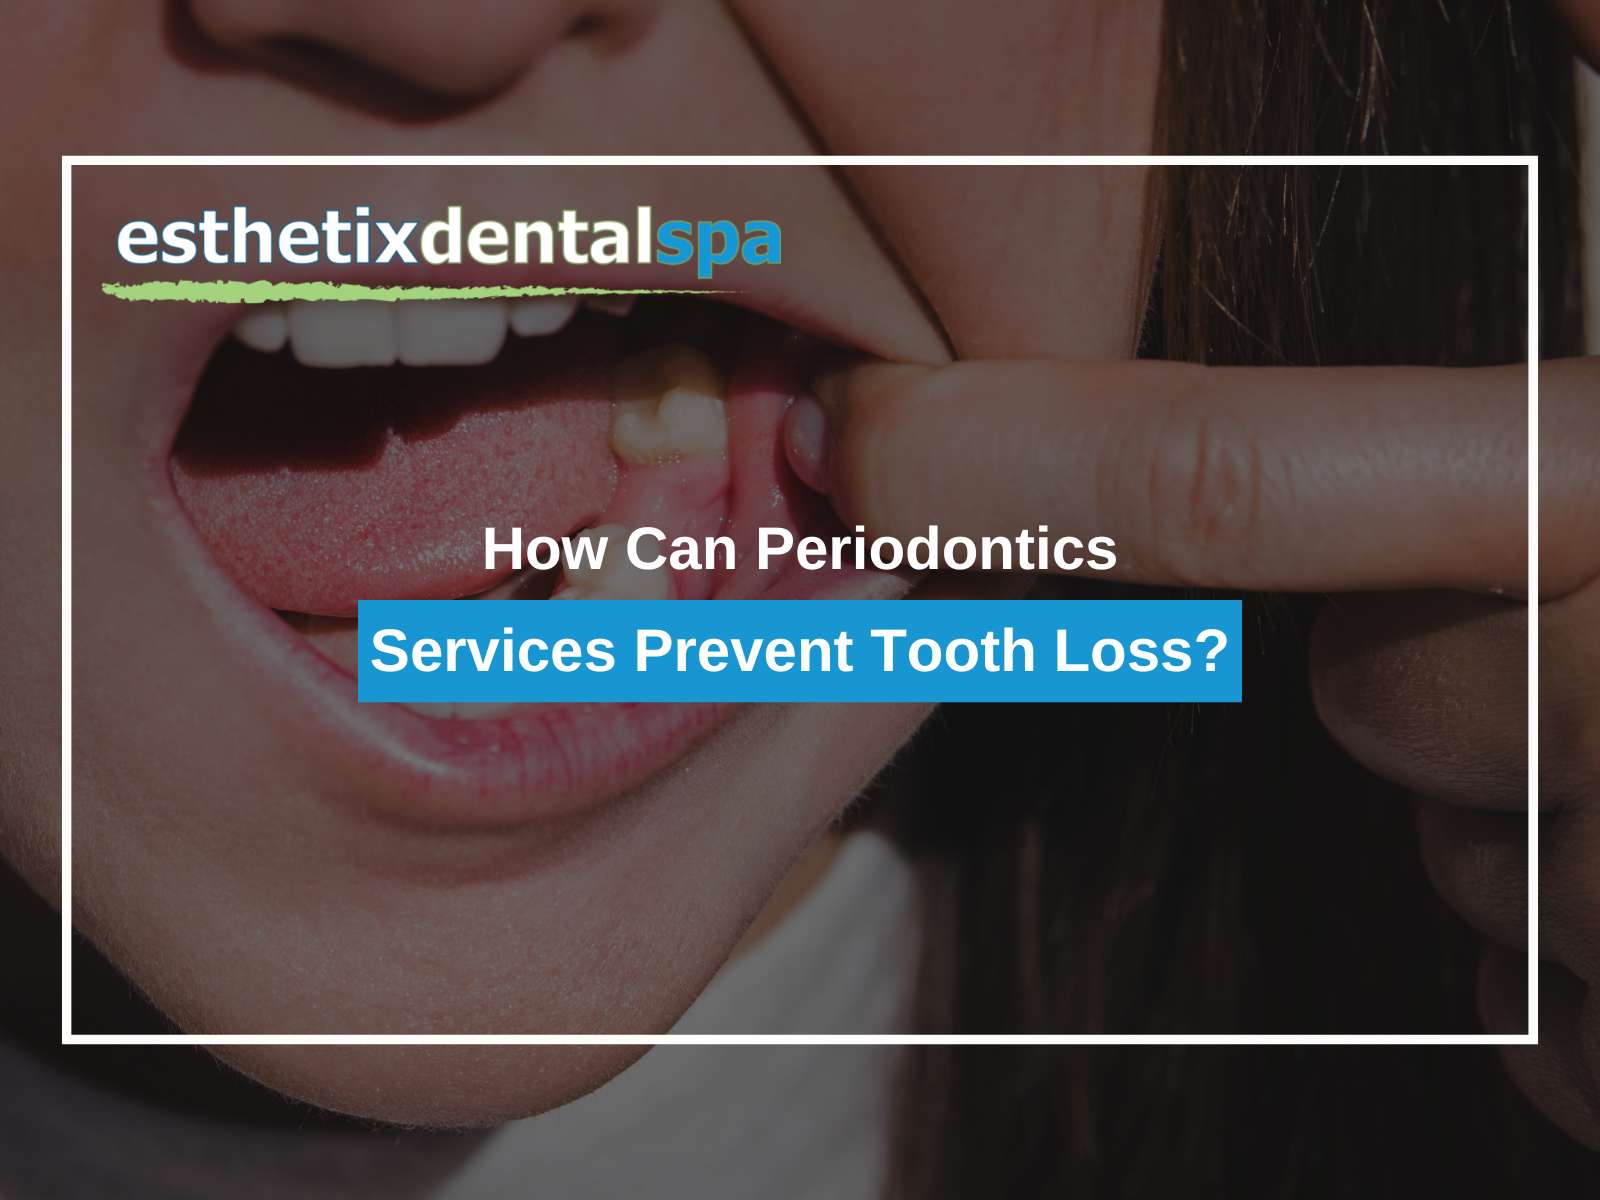 How Can Periodontics Services Prevent Tooth Loss